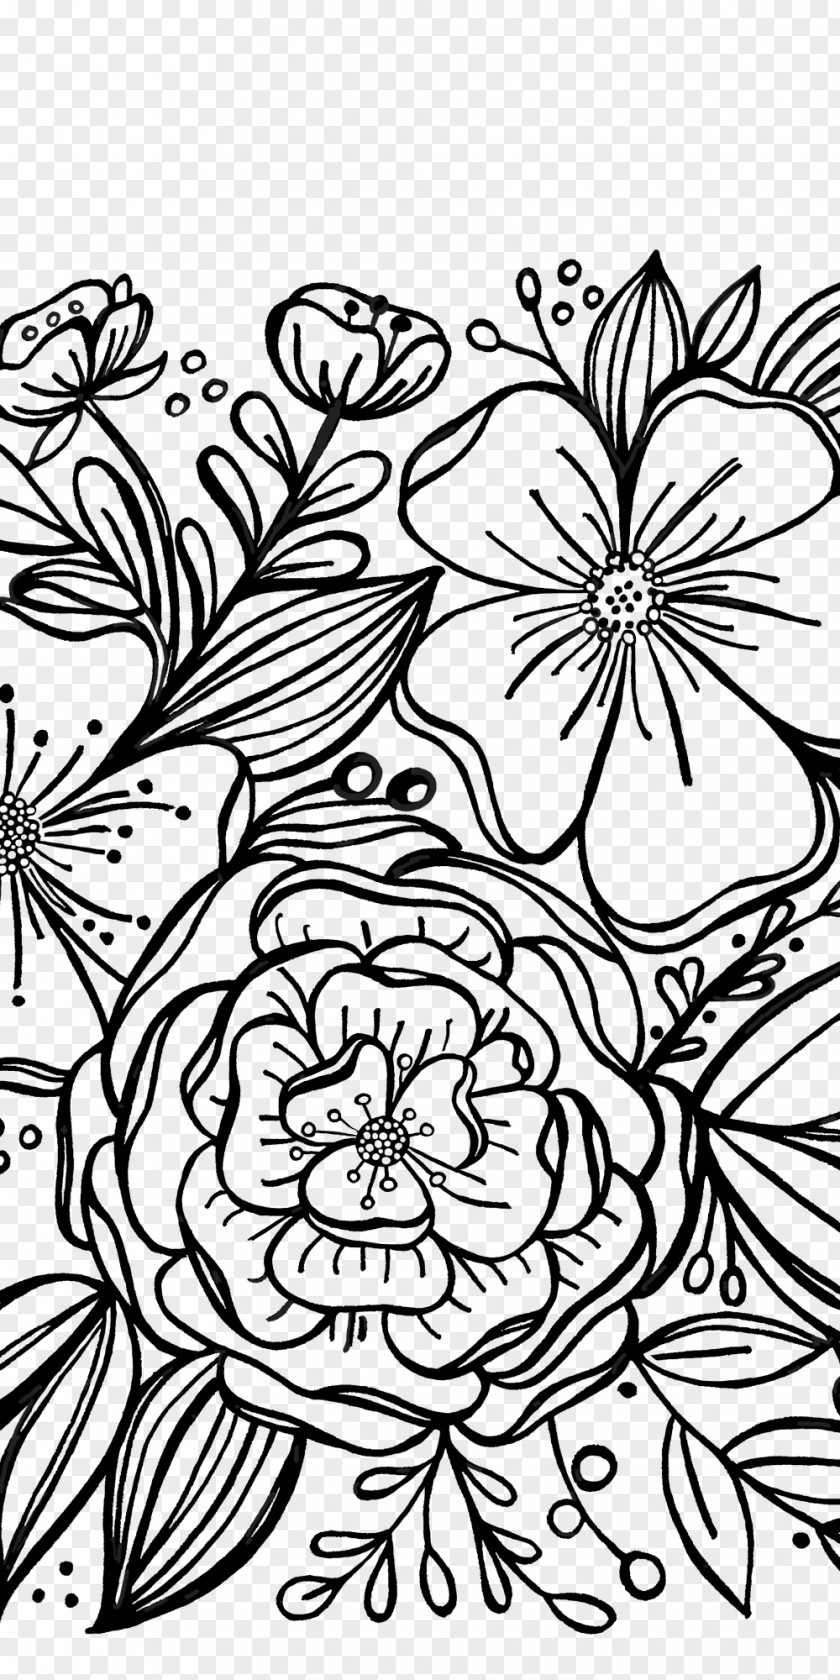 Black And White Drawn Flowers Doodle Floral Design Illustration Drawing Clip Art PNG